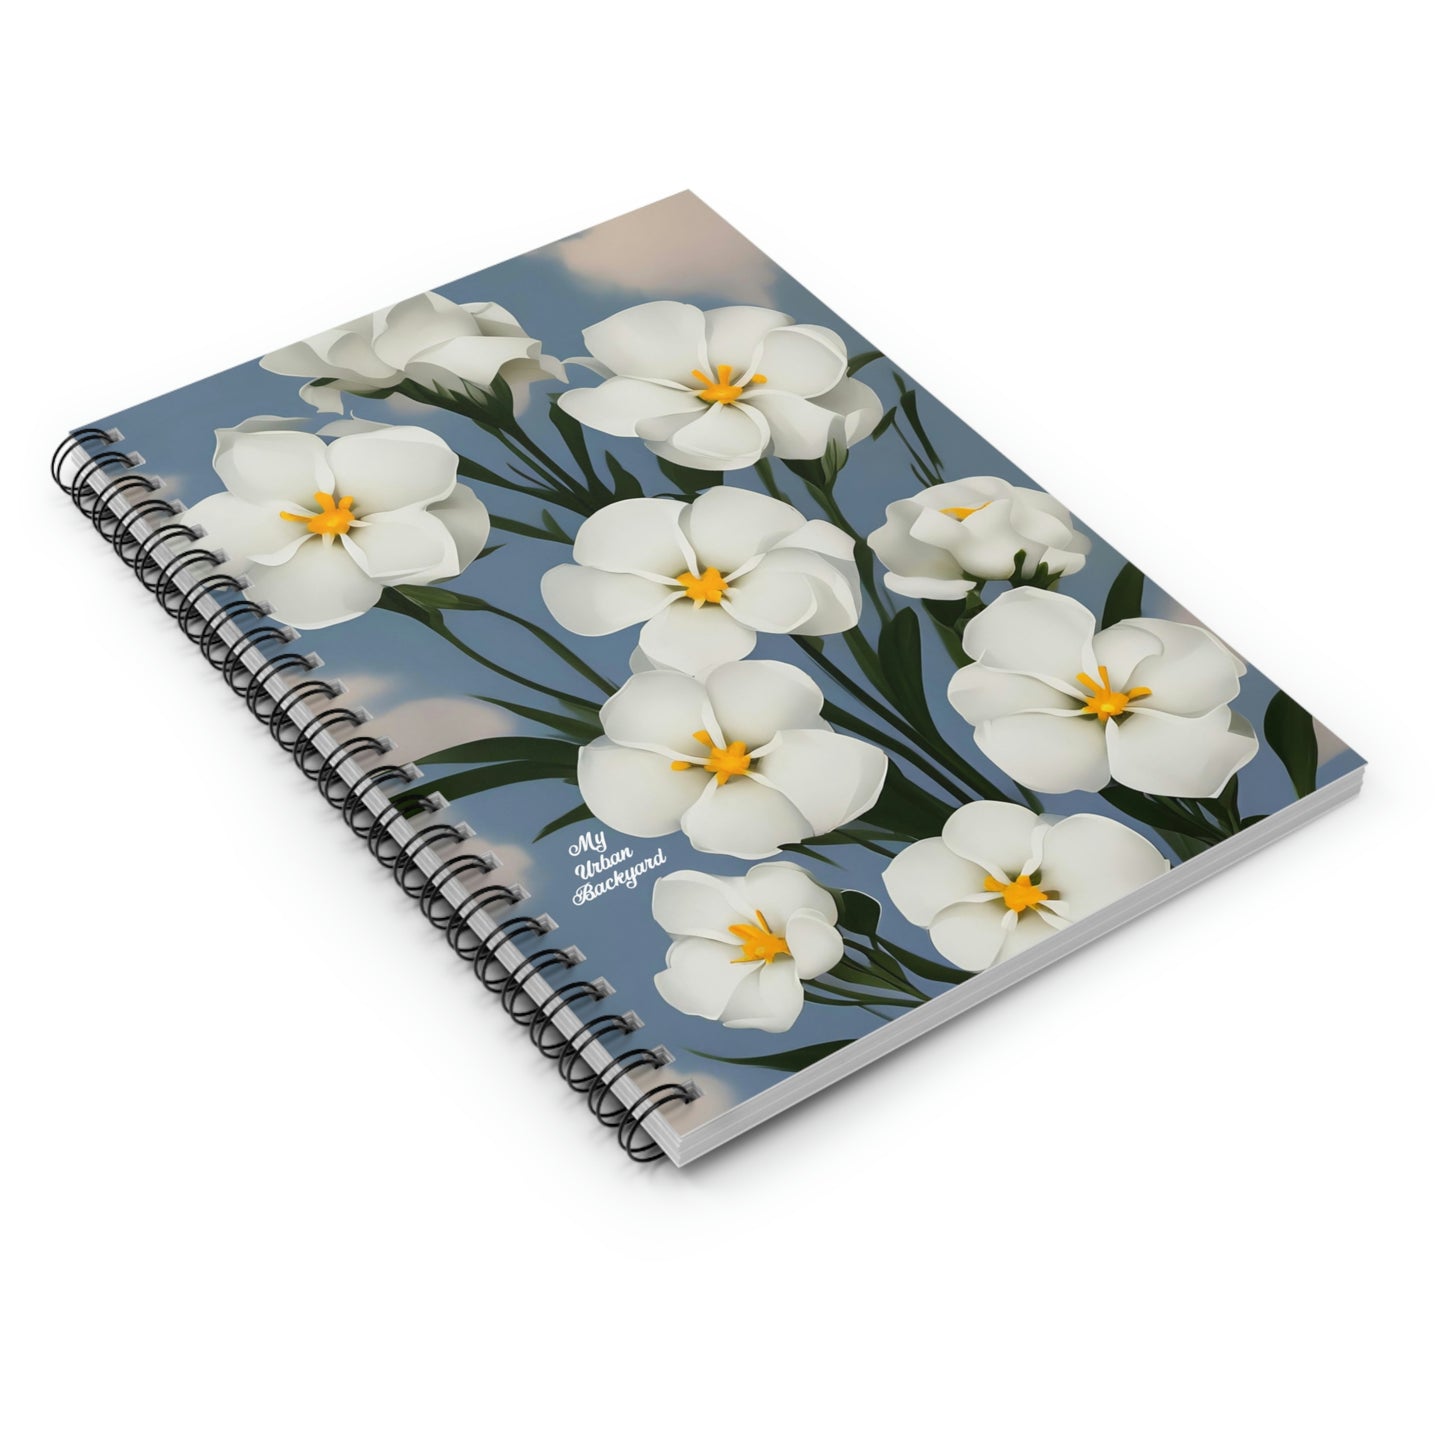 Spiral Notebook Writing Journal with 118 ruled line pages - White Flowers